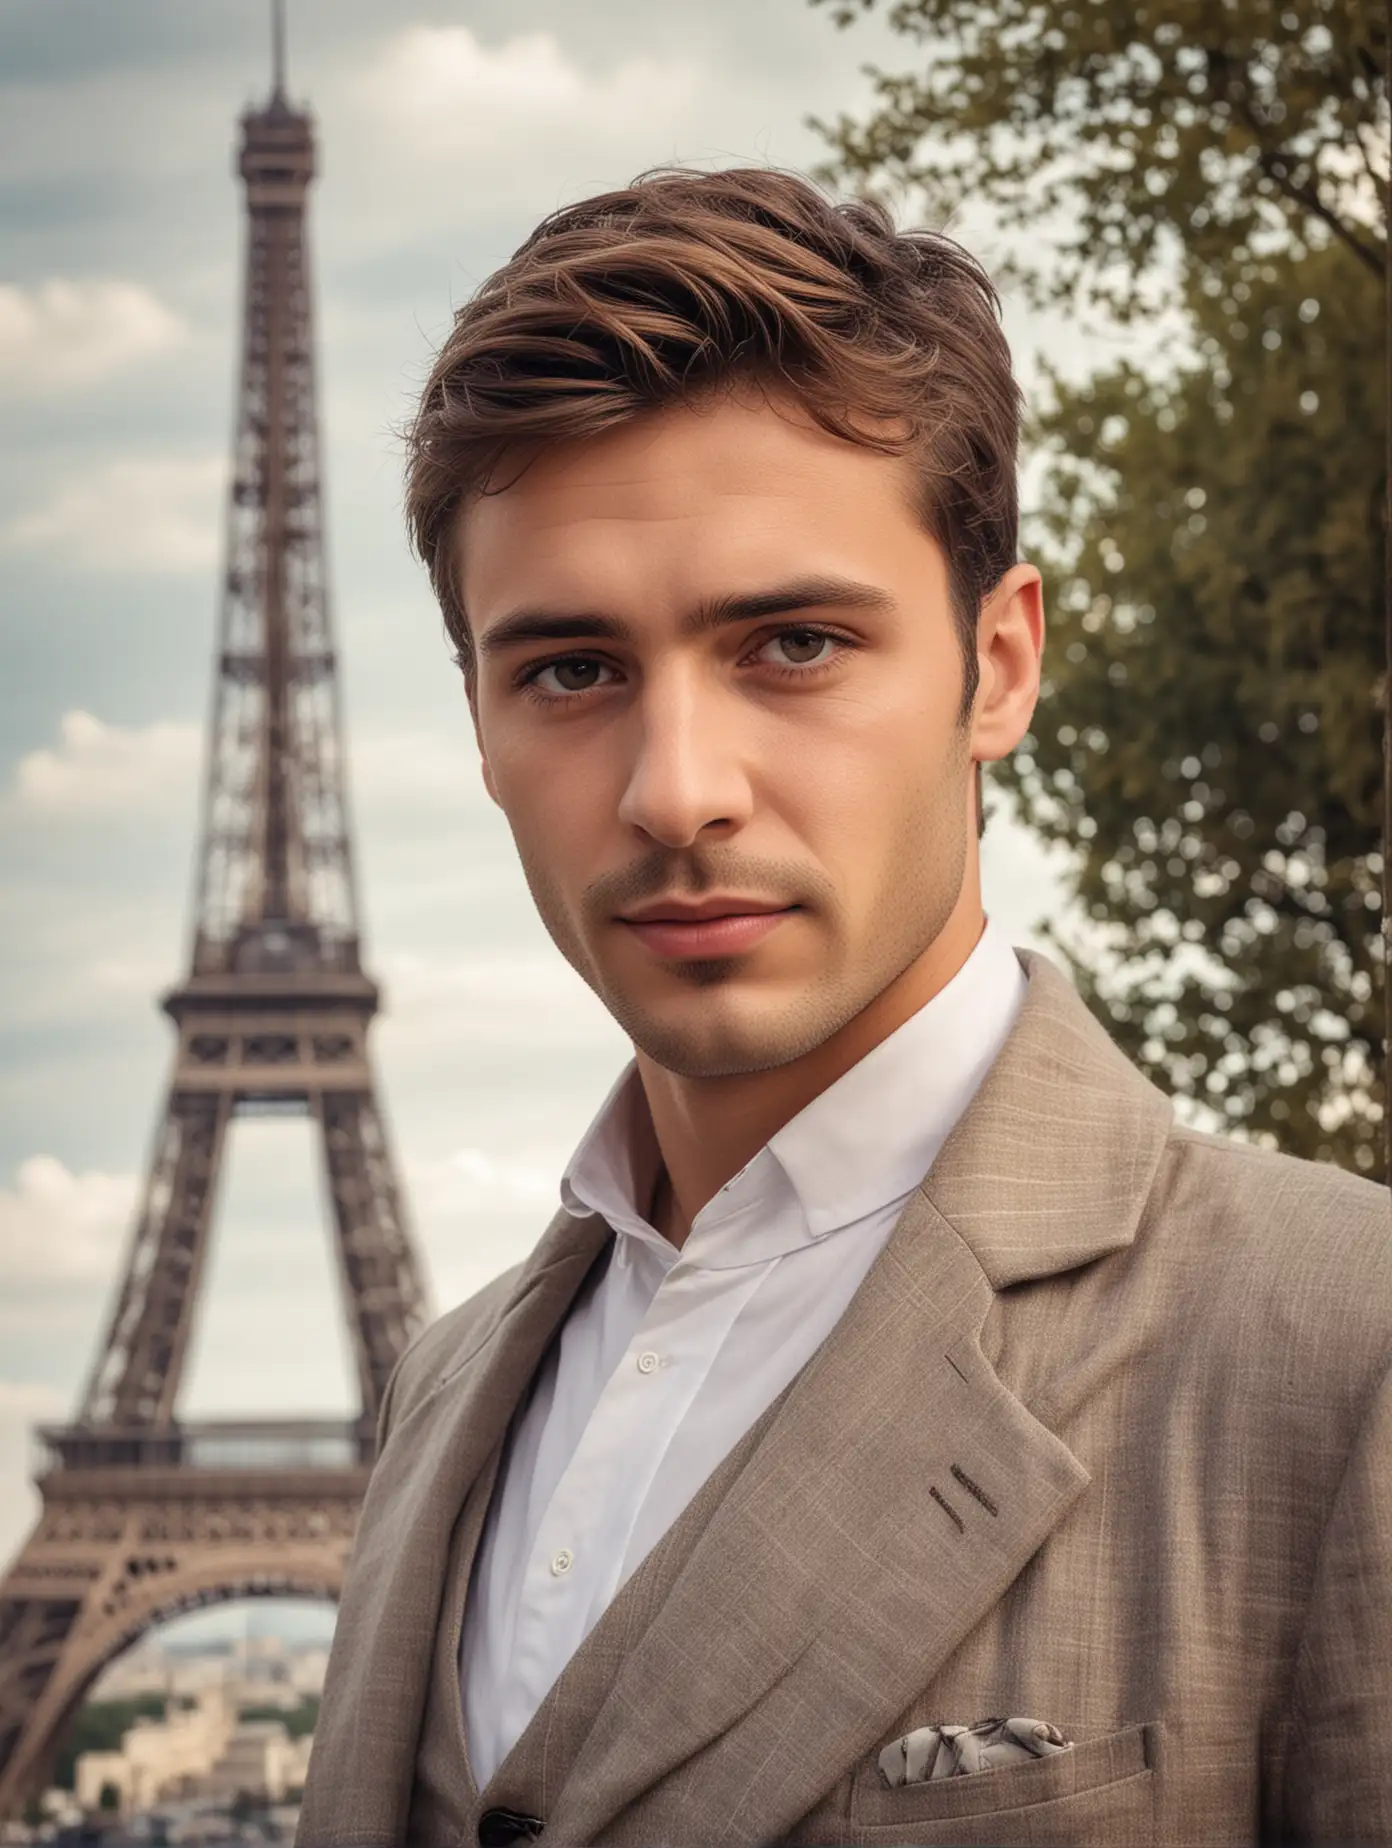 a handsome guy, French, Wearing French clothing, with exquisite facial features, With the Eiffel Tower in the background, professional photography technology